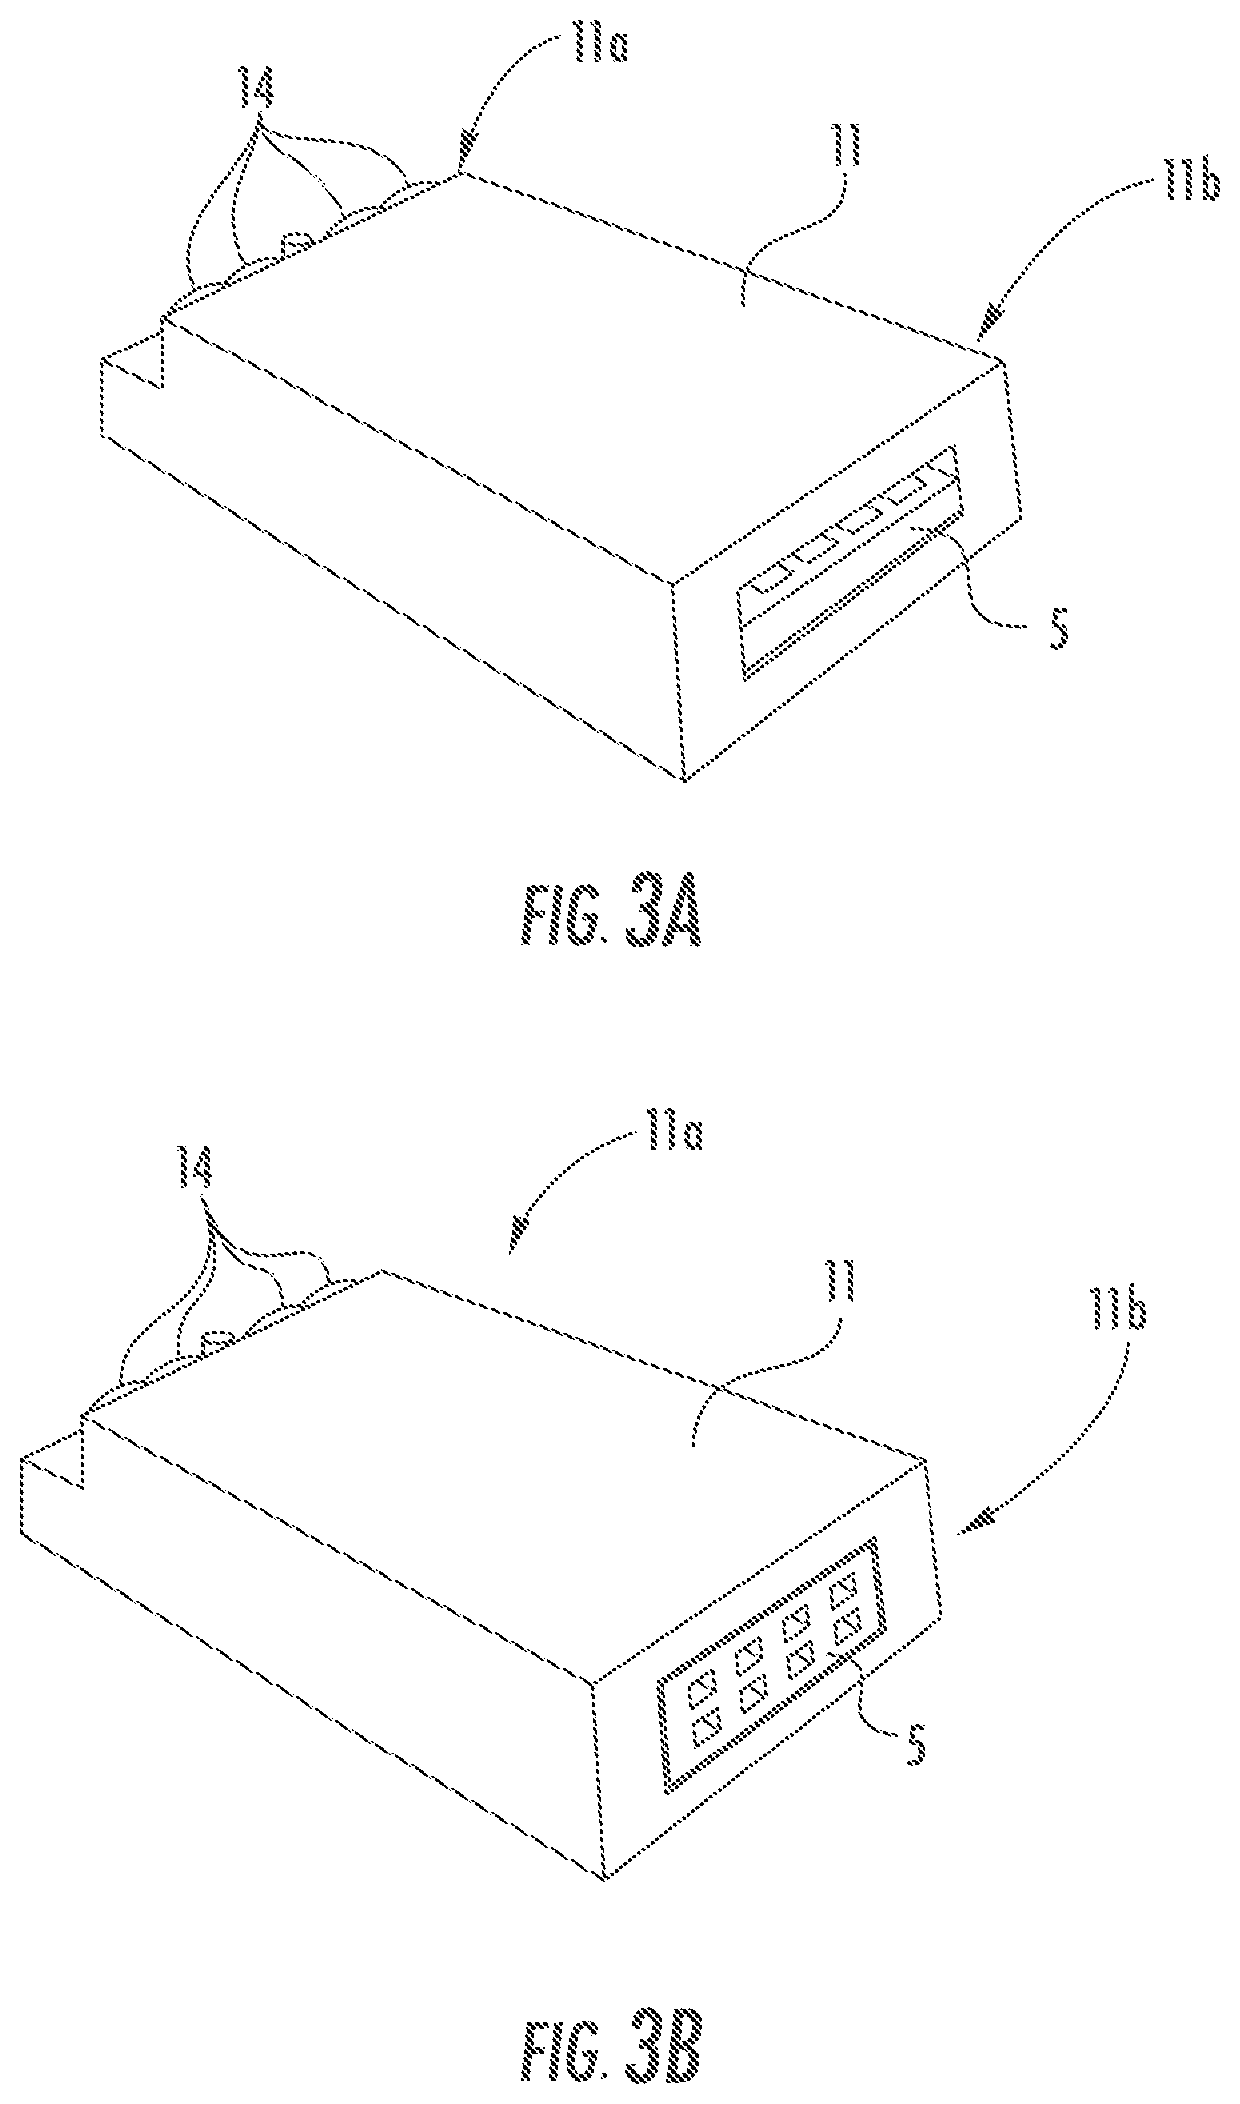 Side-edge connector system providing electrical connection between devices in a manner which minimizes dedicated connection space